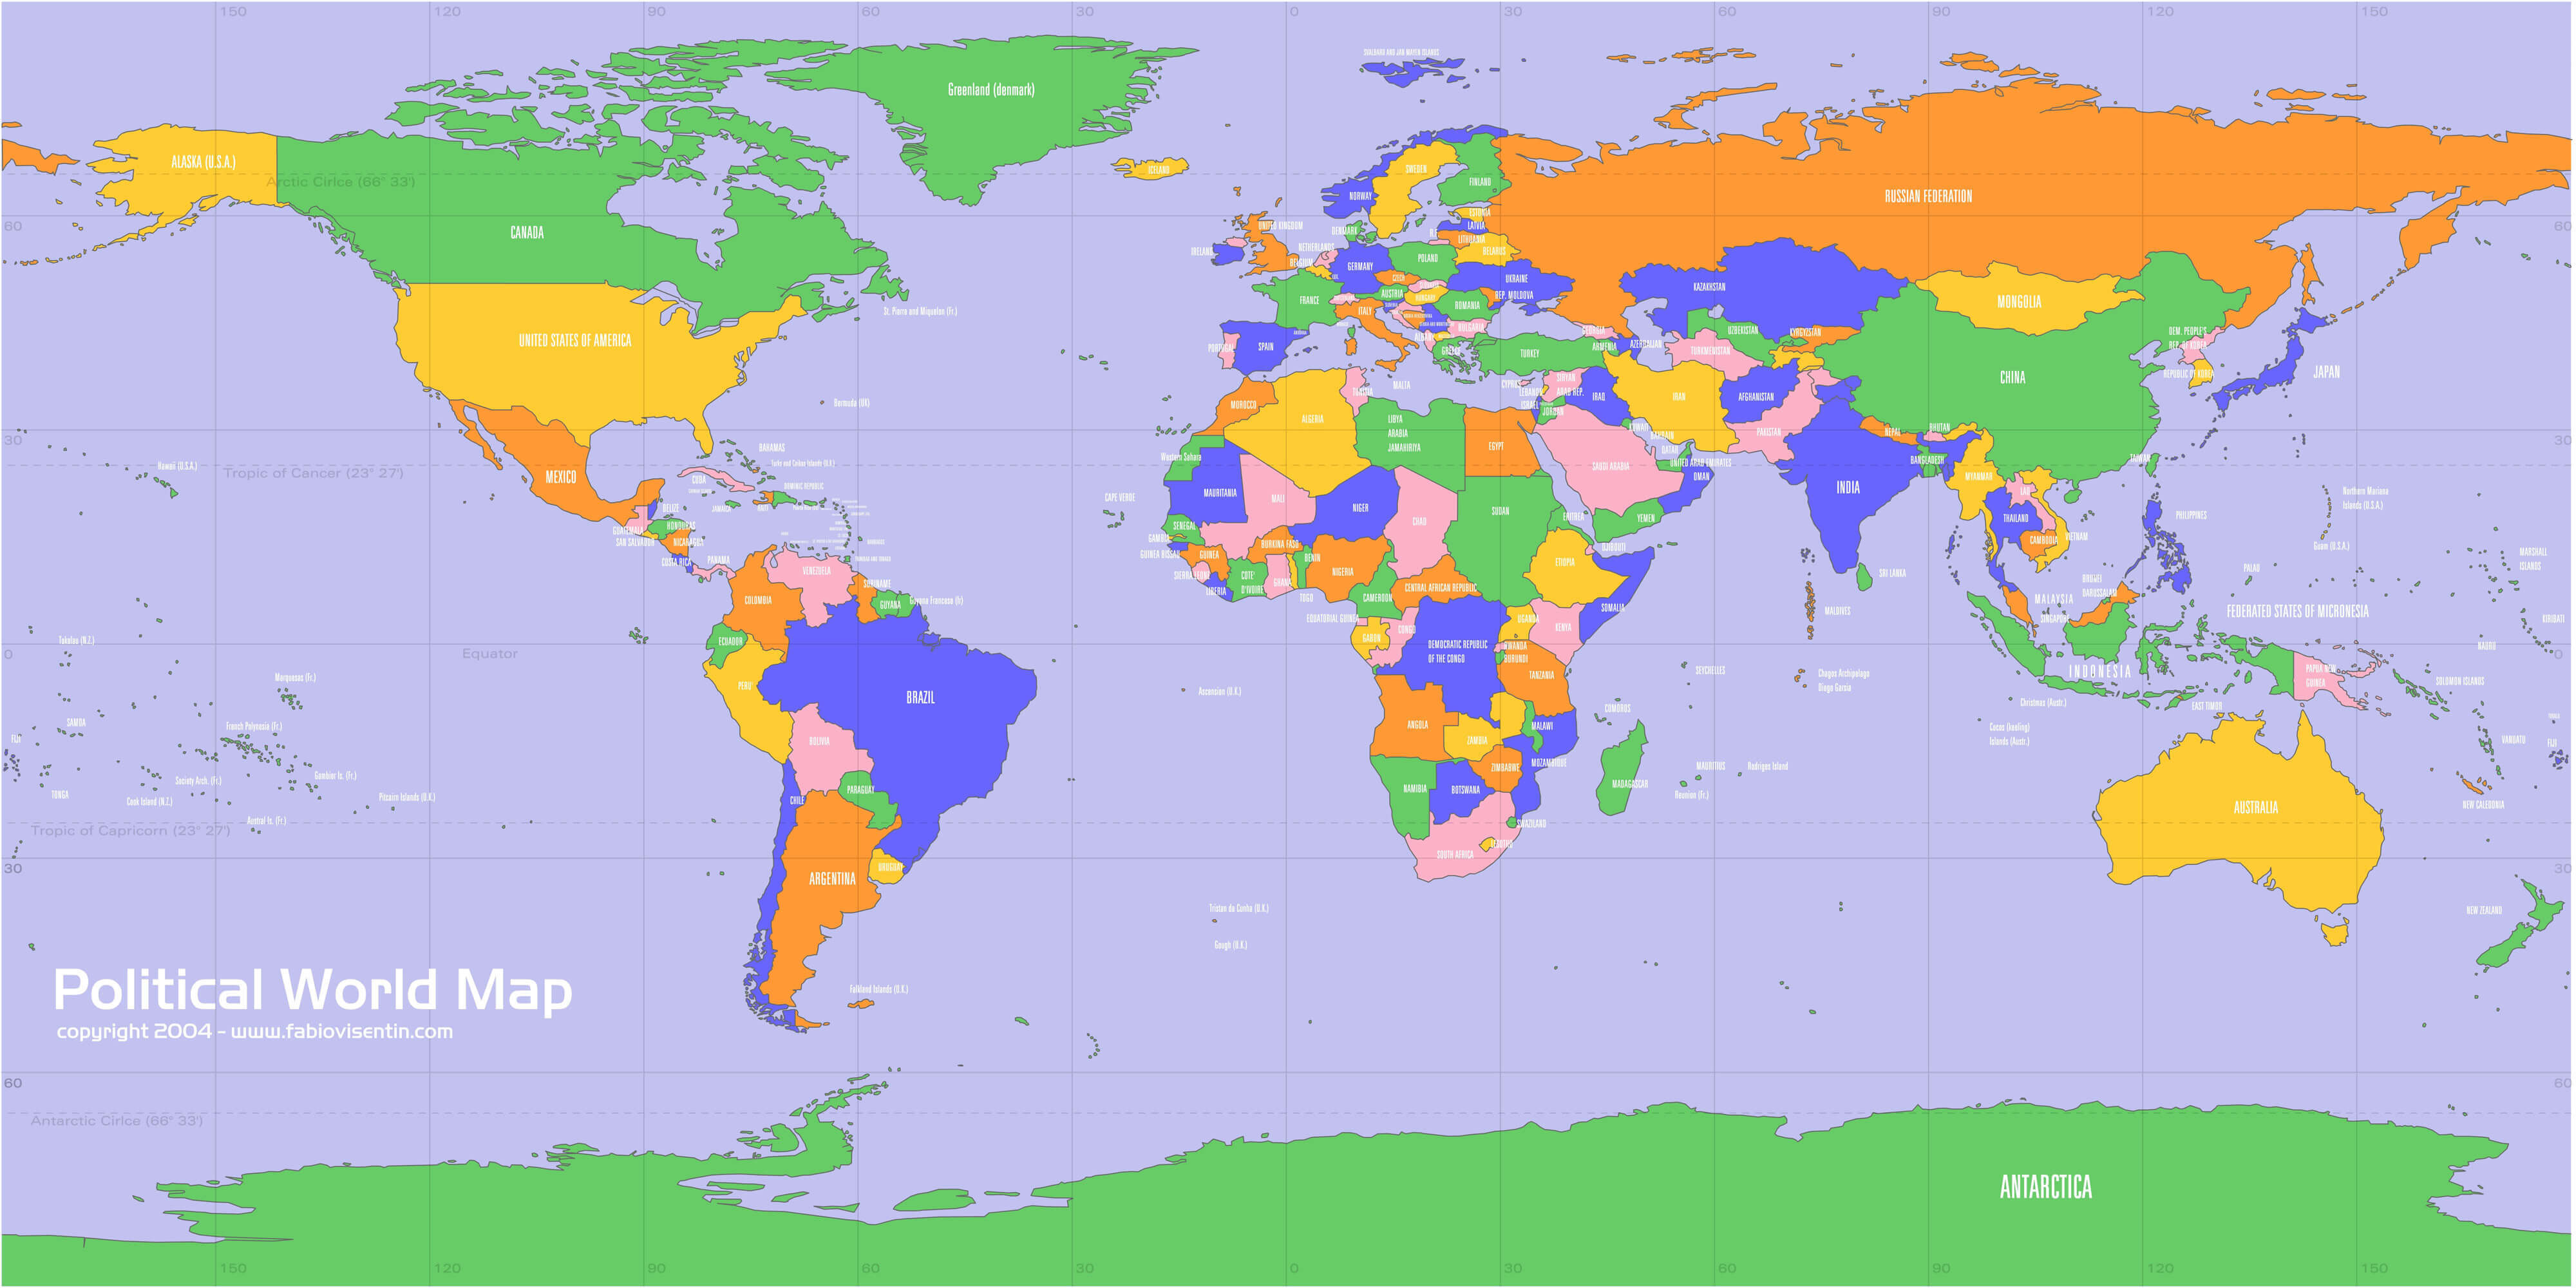 Politic Map of the World